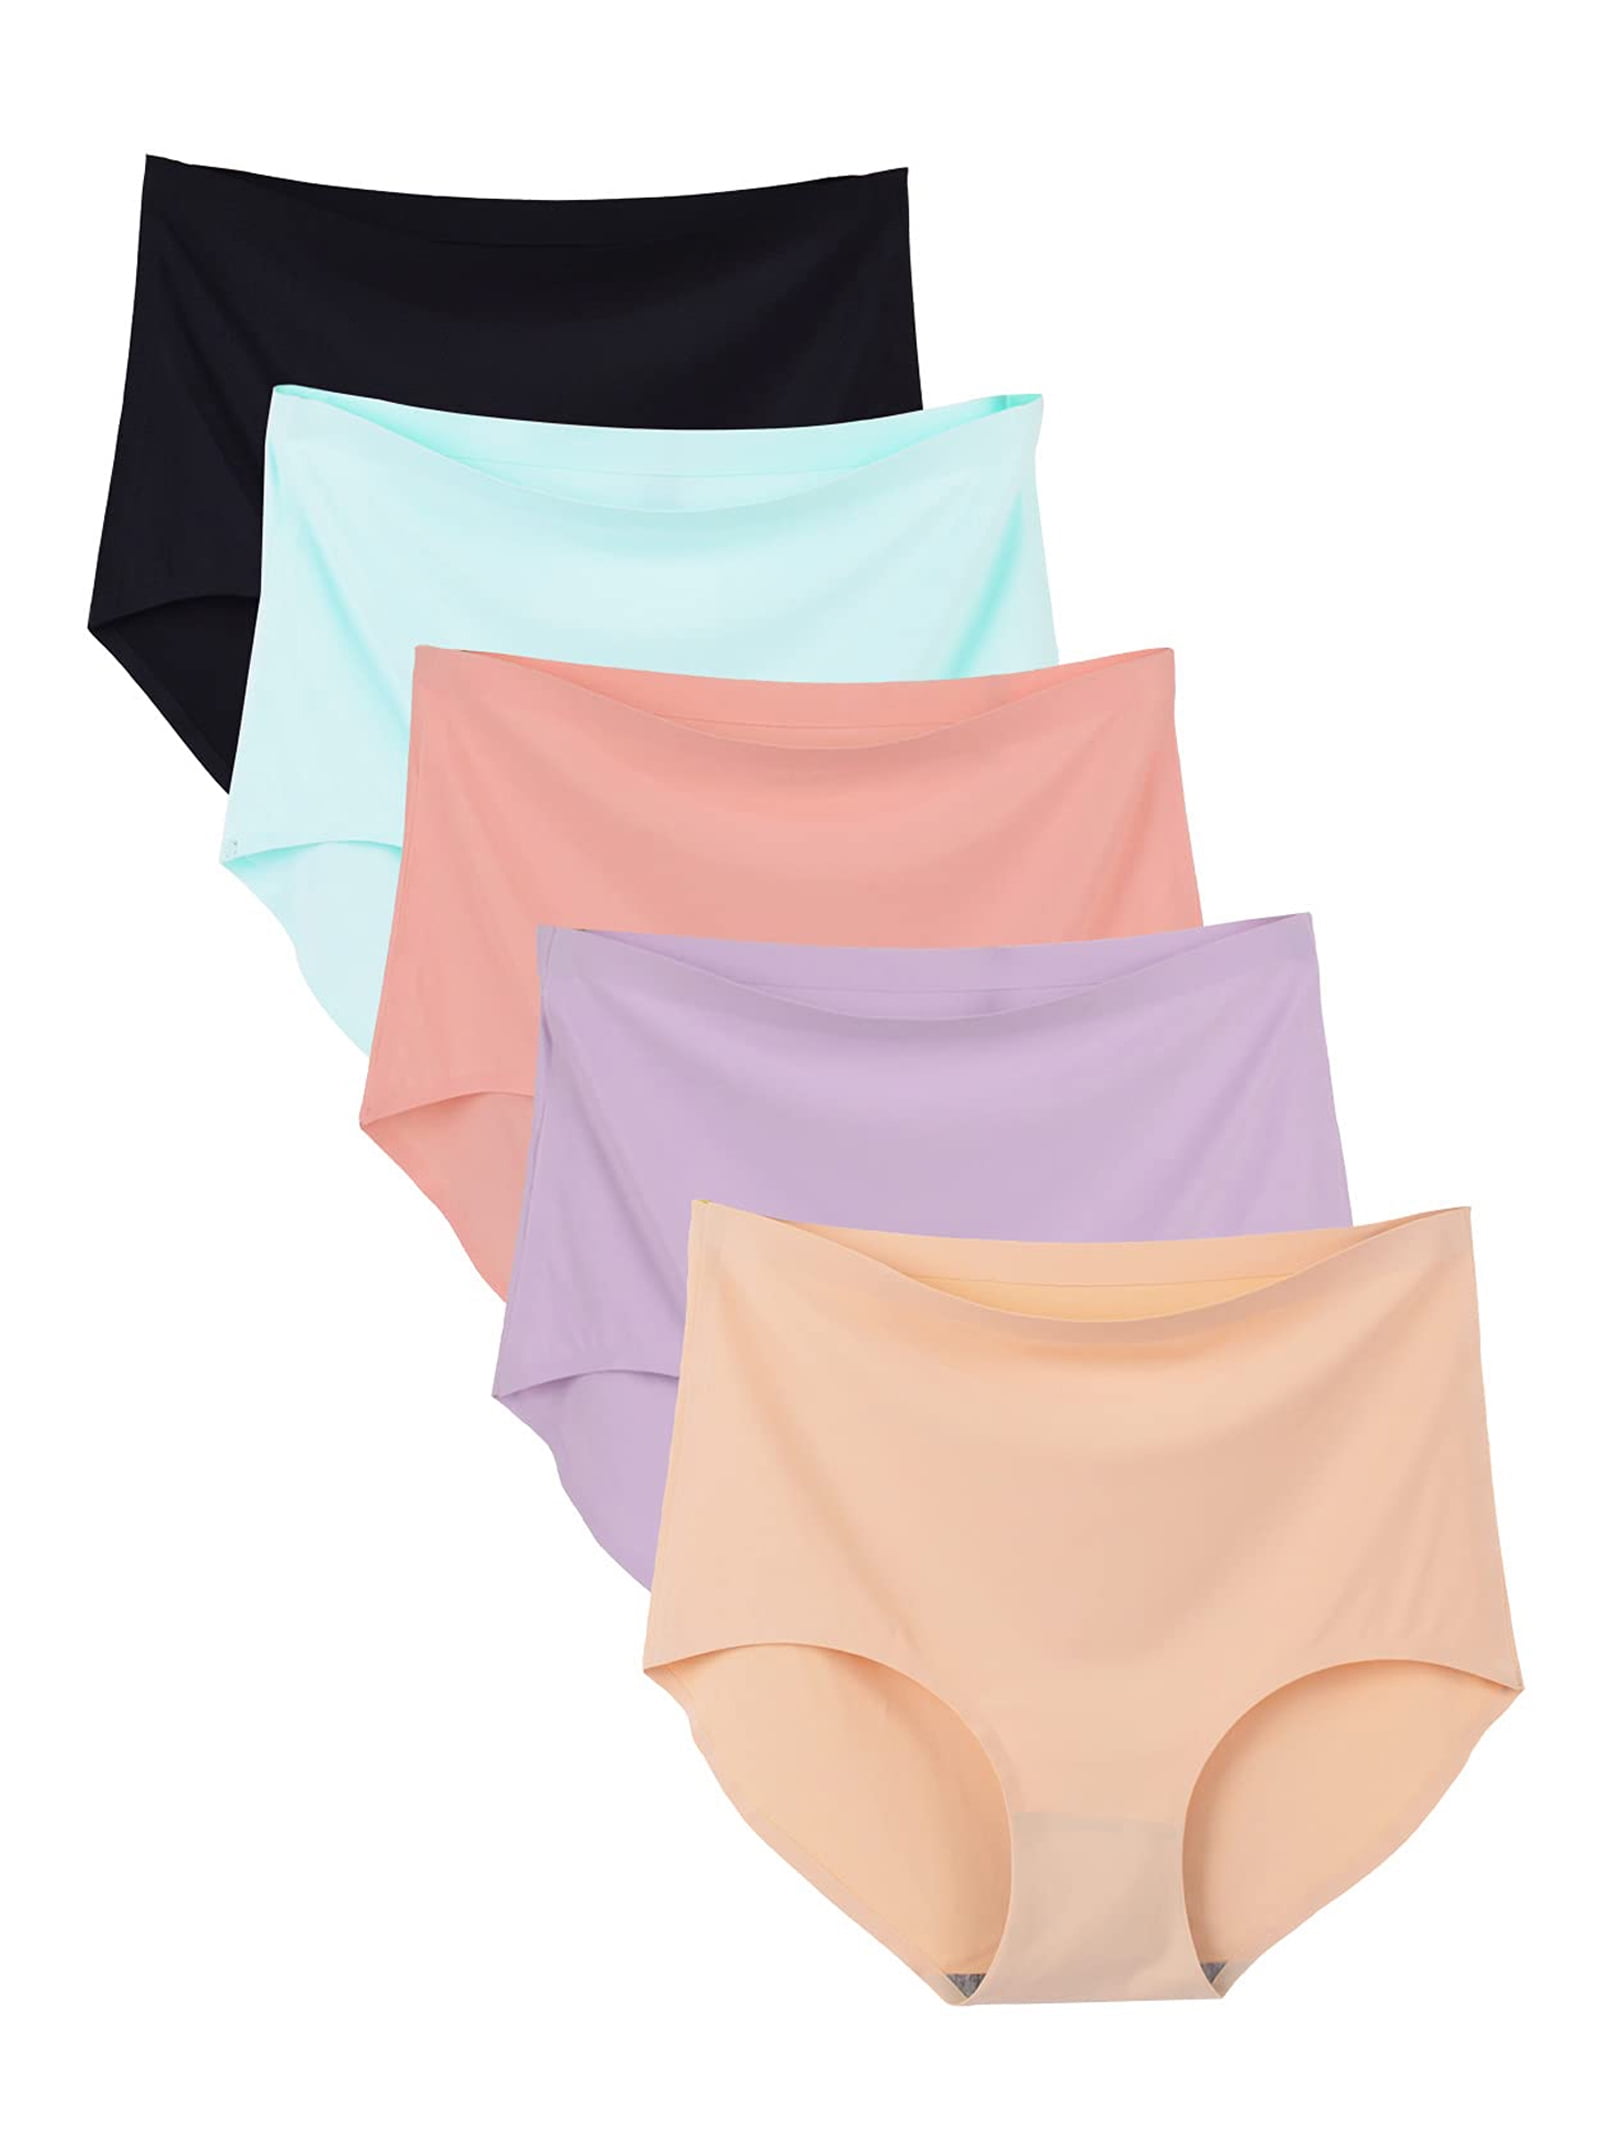 Buankoxy 5 Pack High Waisted Underwear for Women Seamless